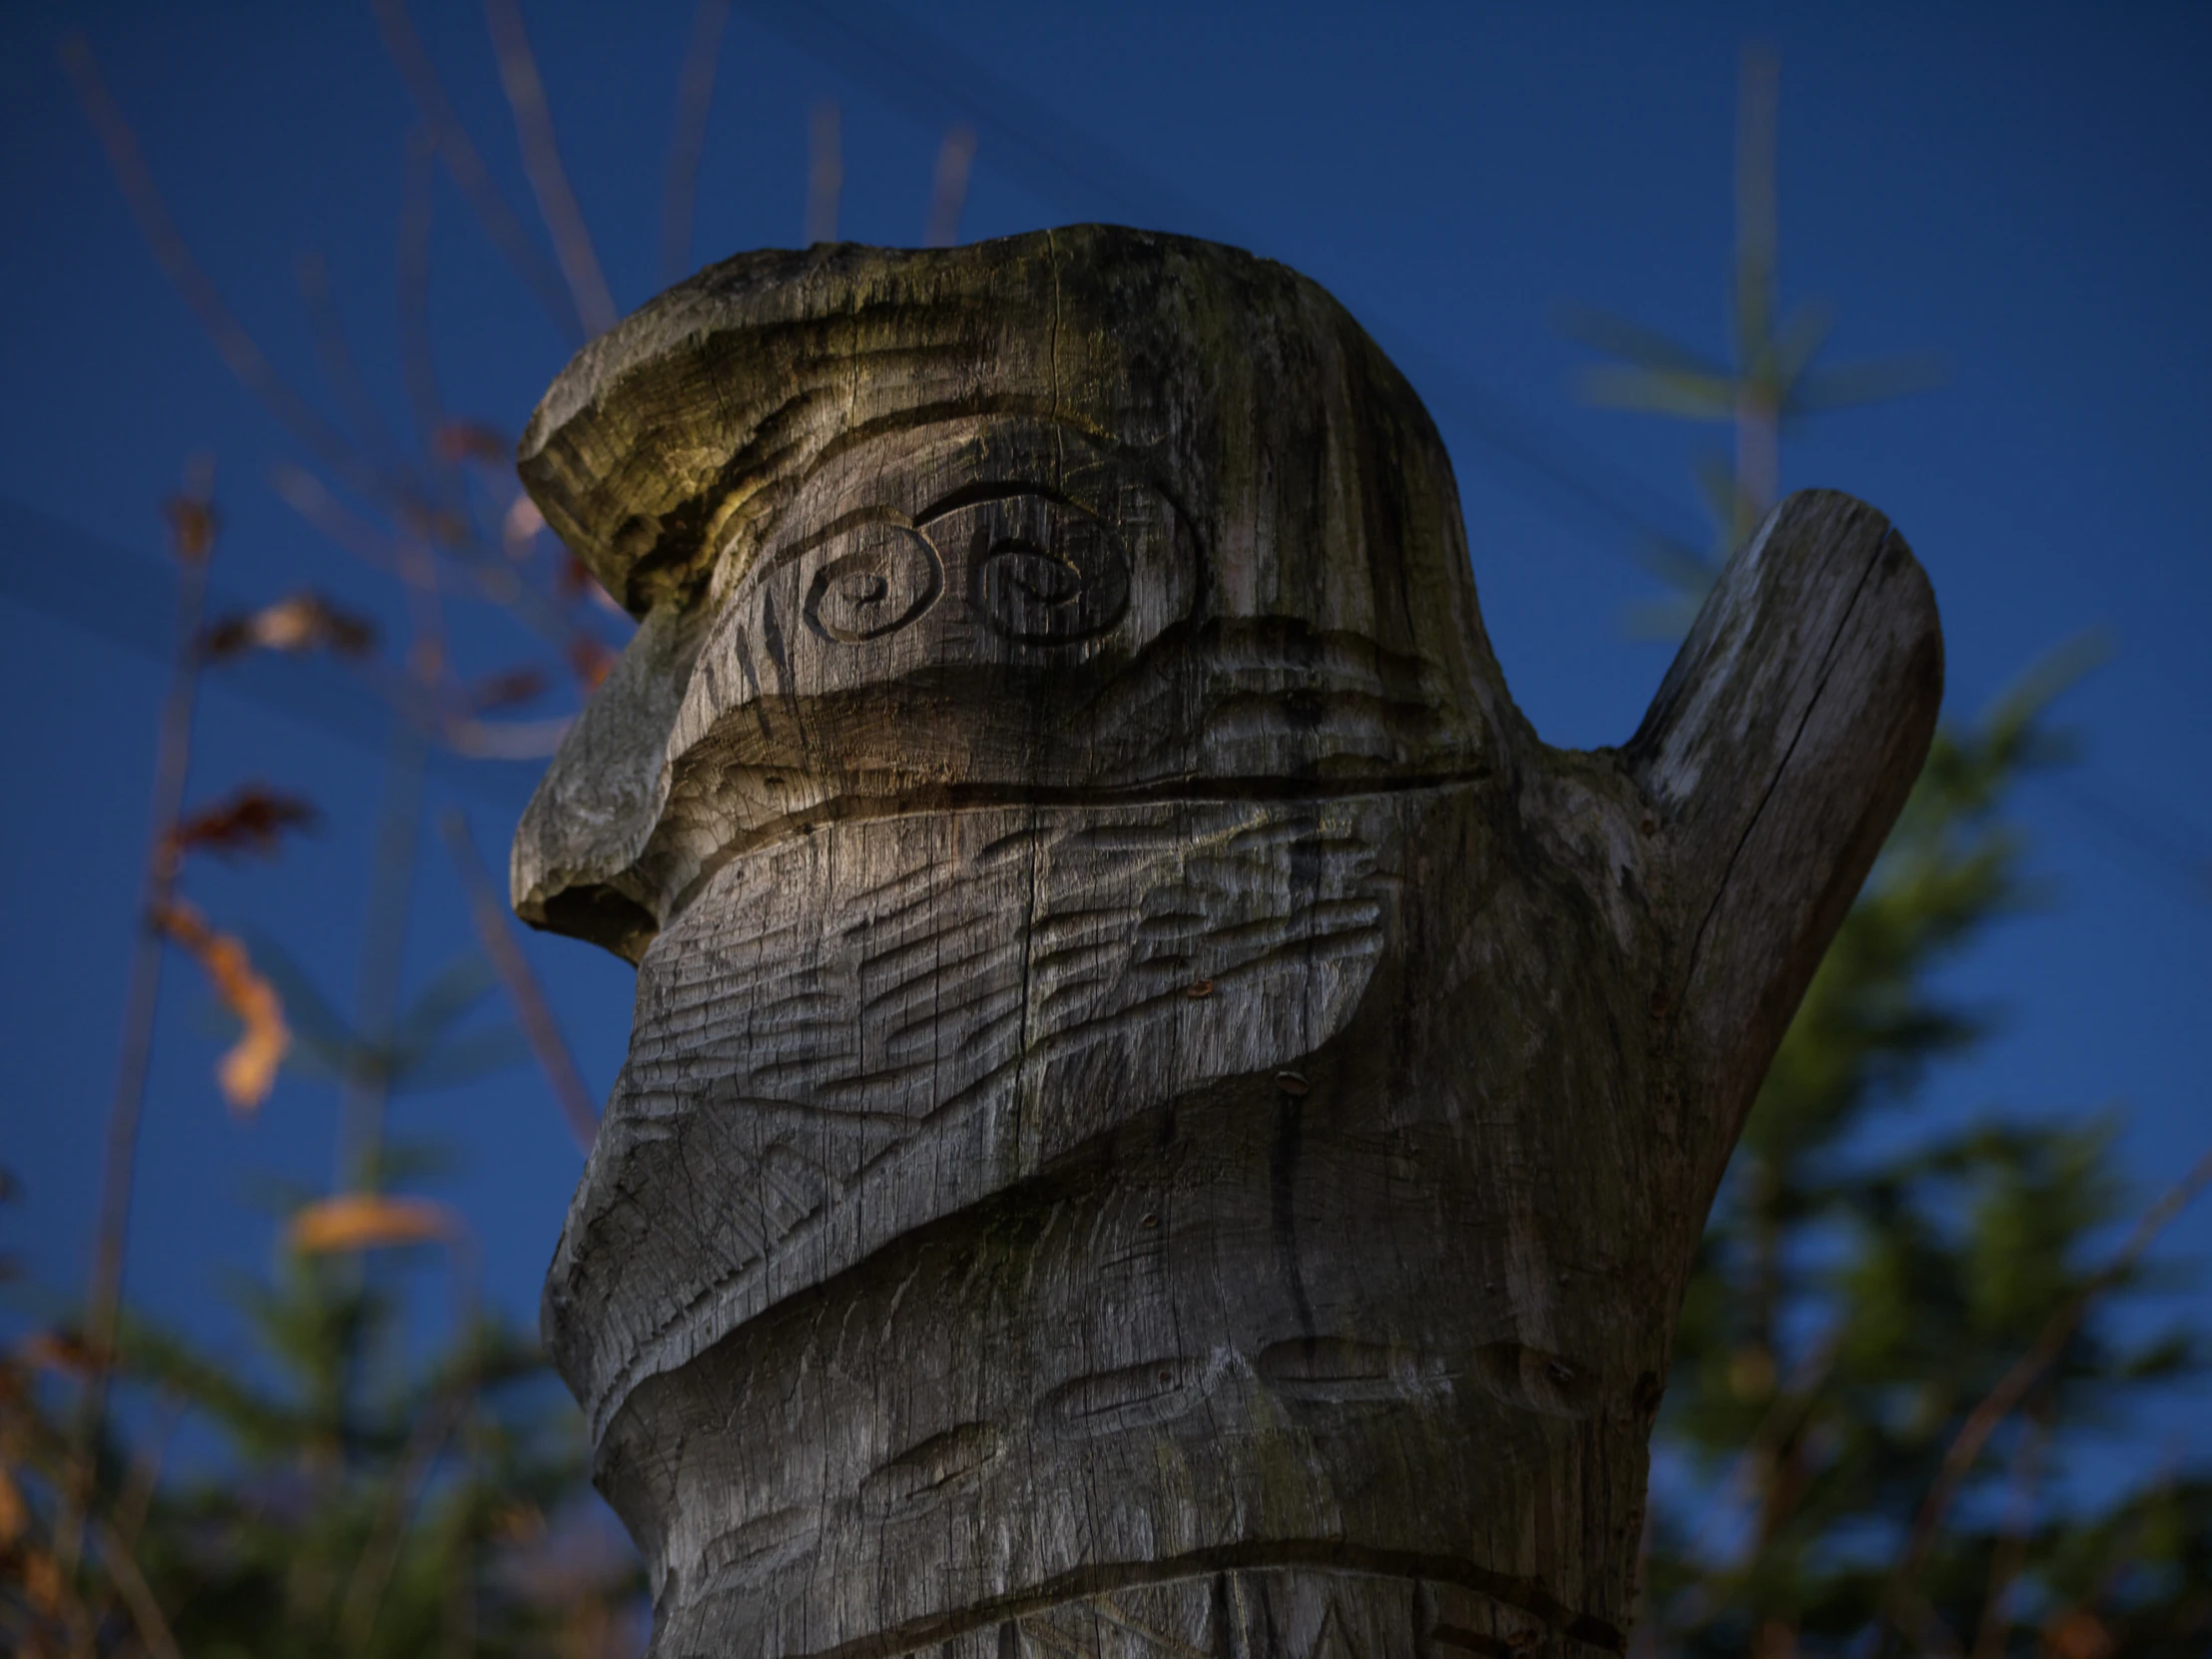 a wooden carved figure is in front of trees